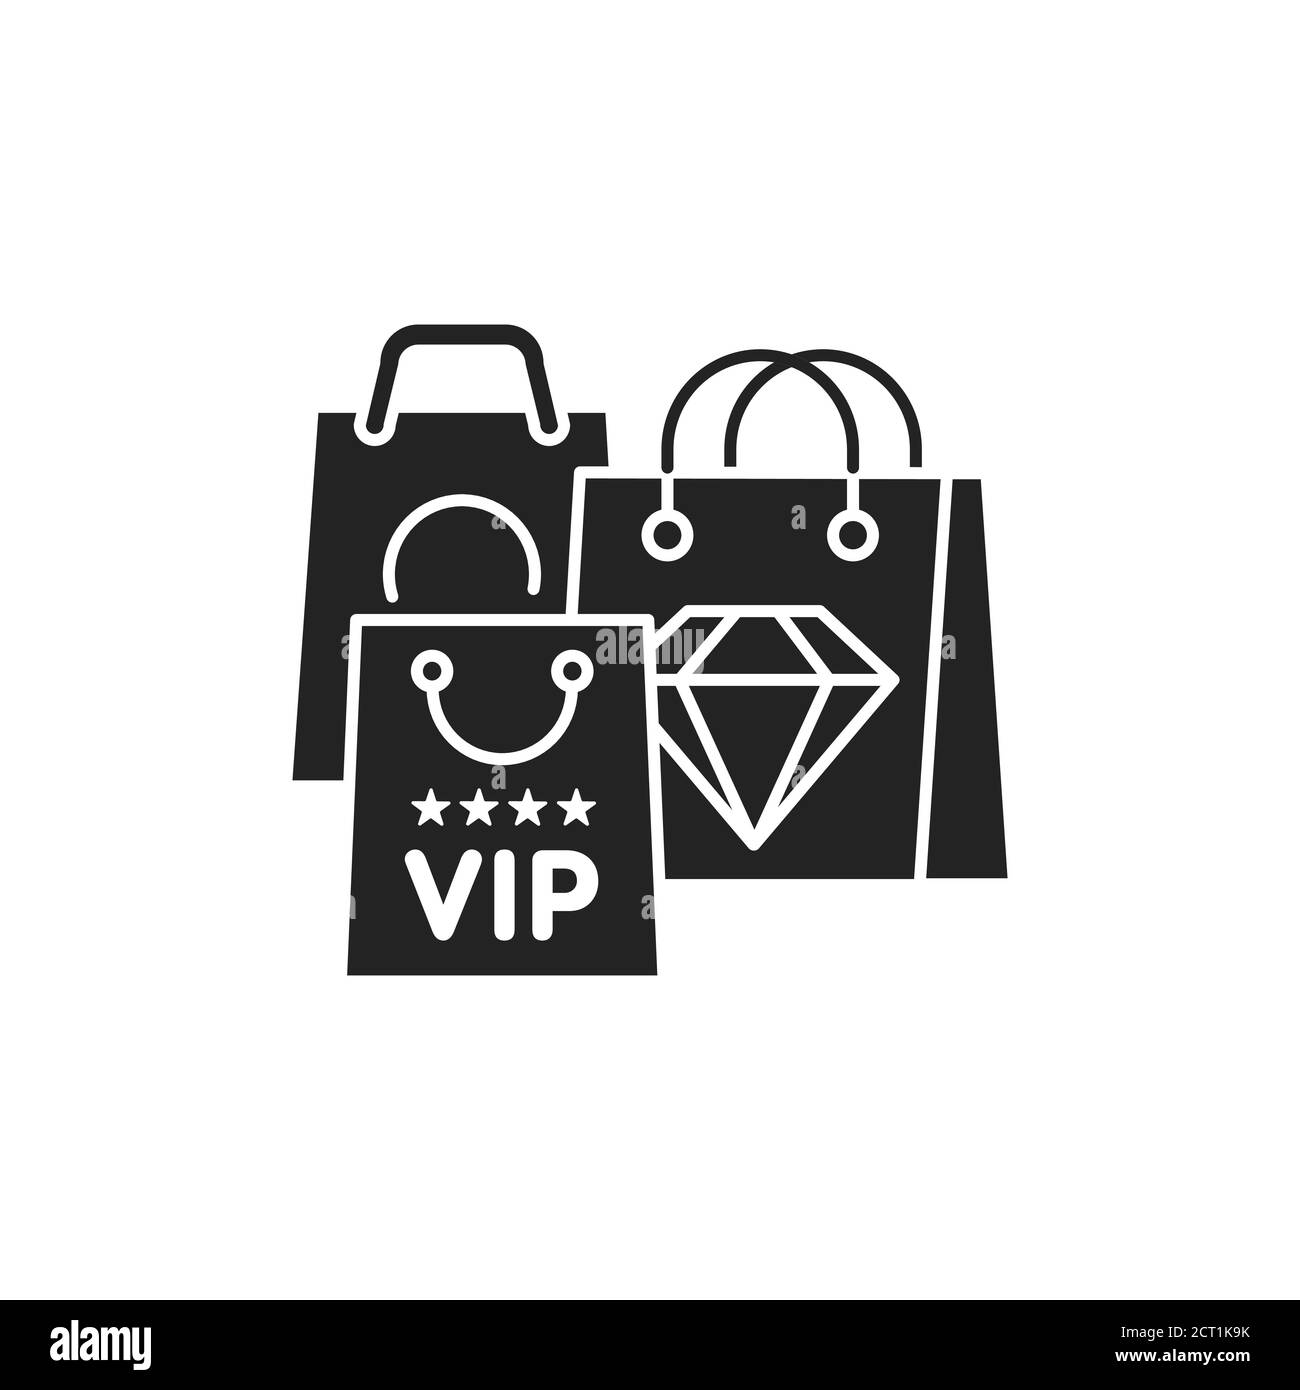 Vip shopping glyph black icon. Luxury lifestyle concept. Sign for web page, mobile app, button, logo. Stock Vector